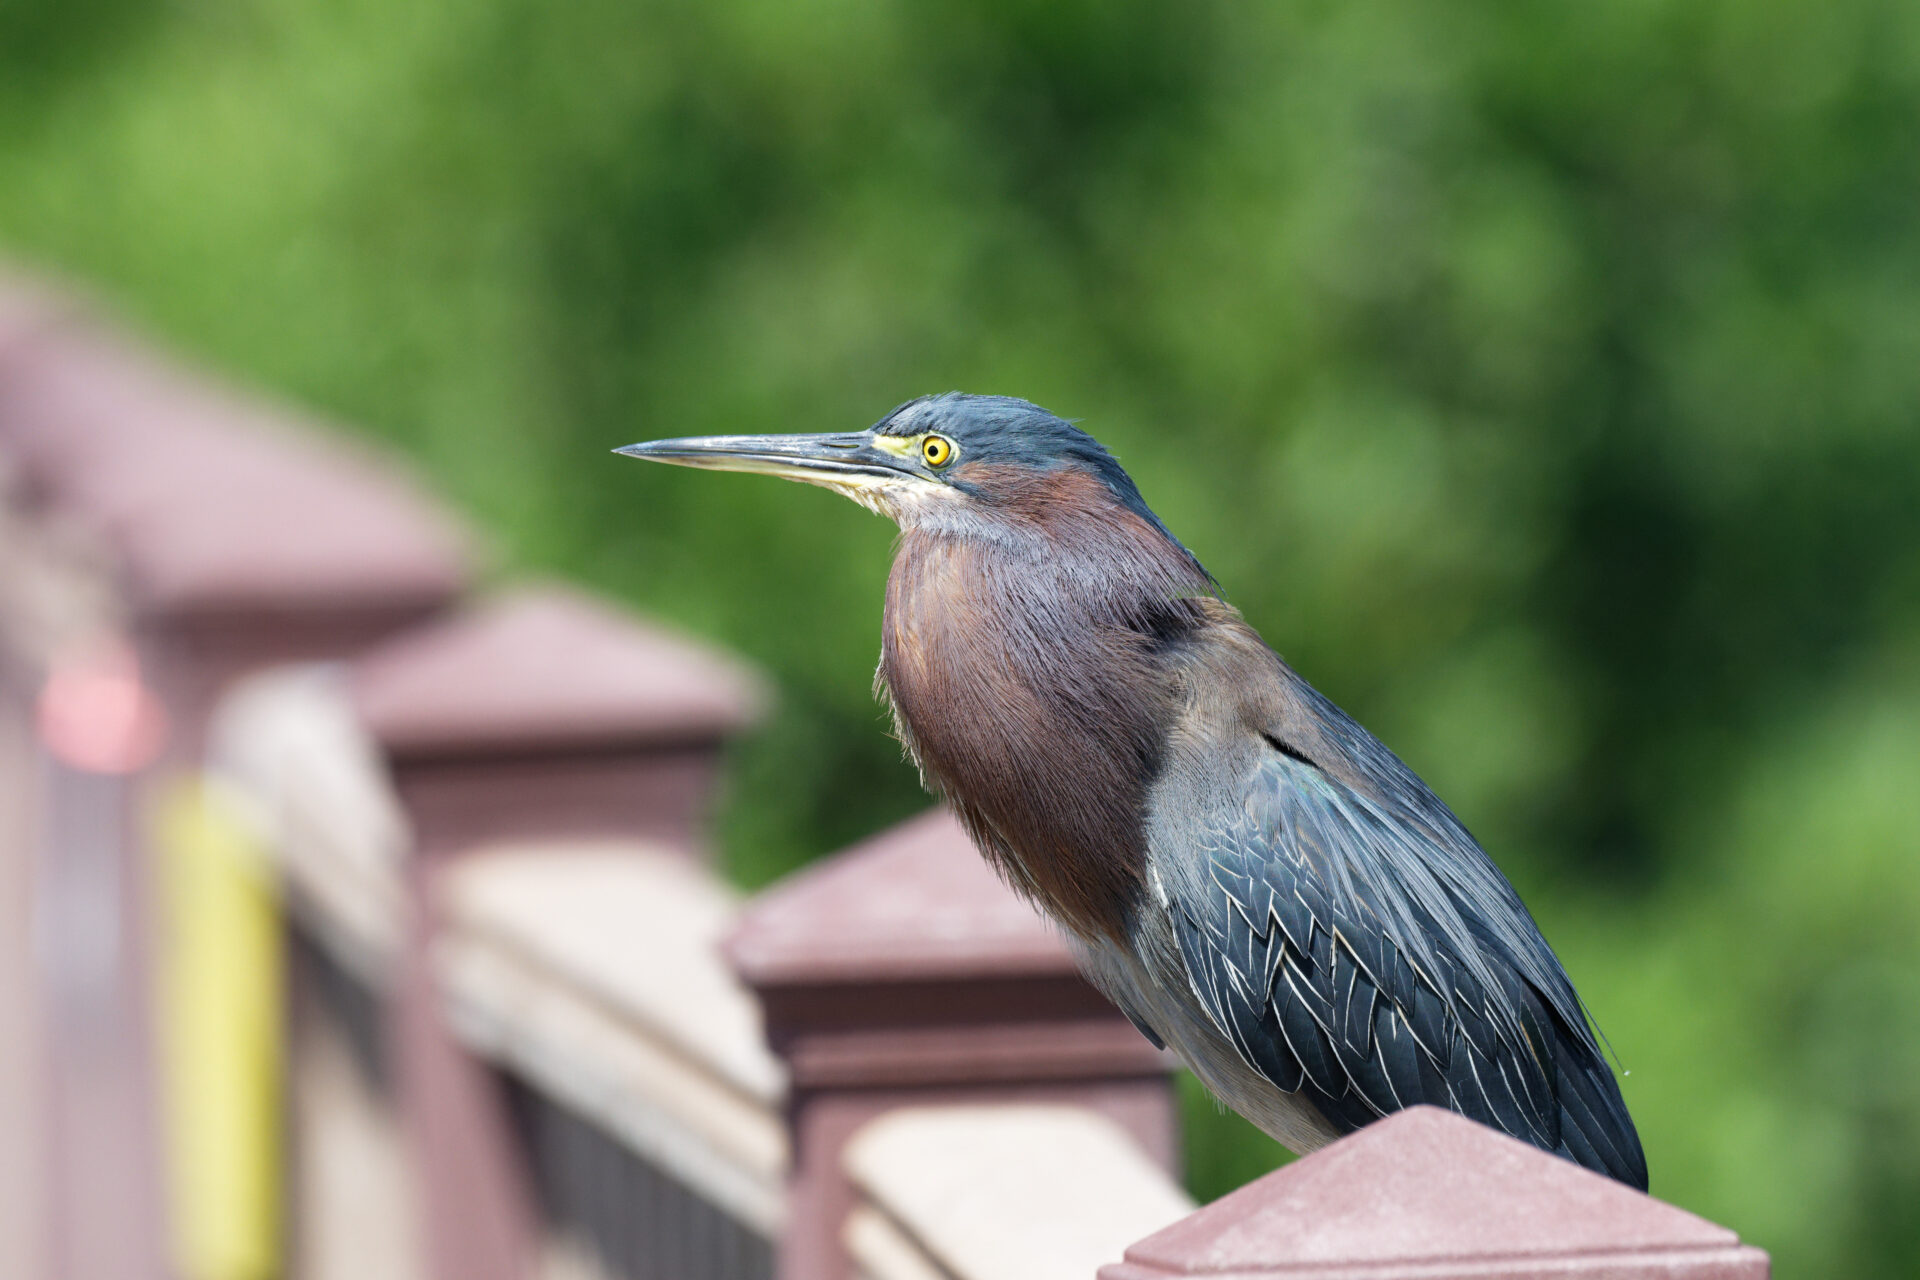 A green heron finds a prominent perch to keep an eye on visitors at the South Padre Island Birding, Nature Center and Alligator Sanctuary. (Rick Kelley/Valley Morning Star)